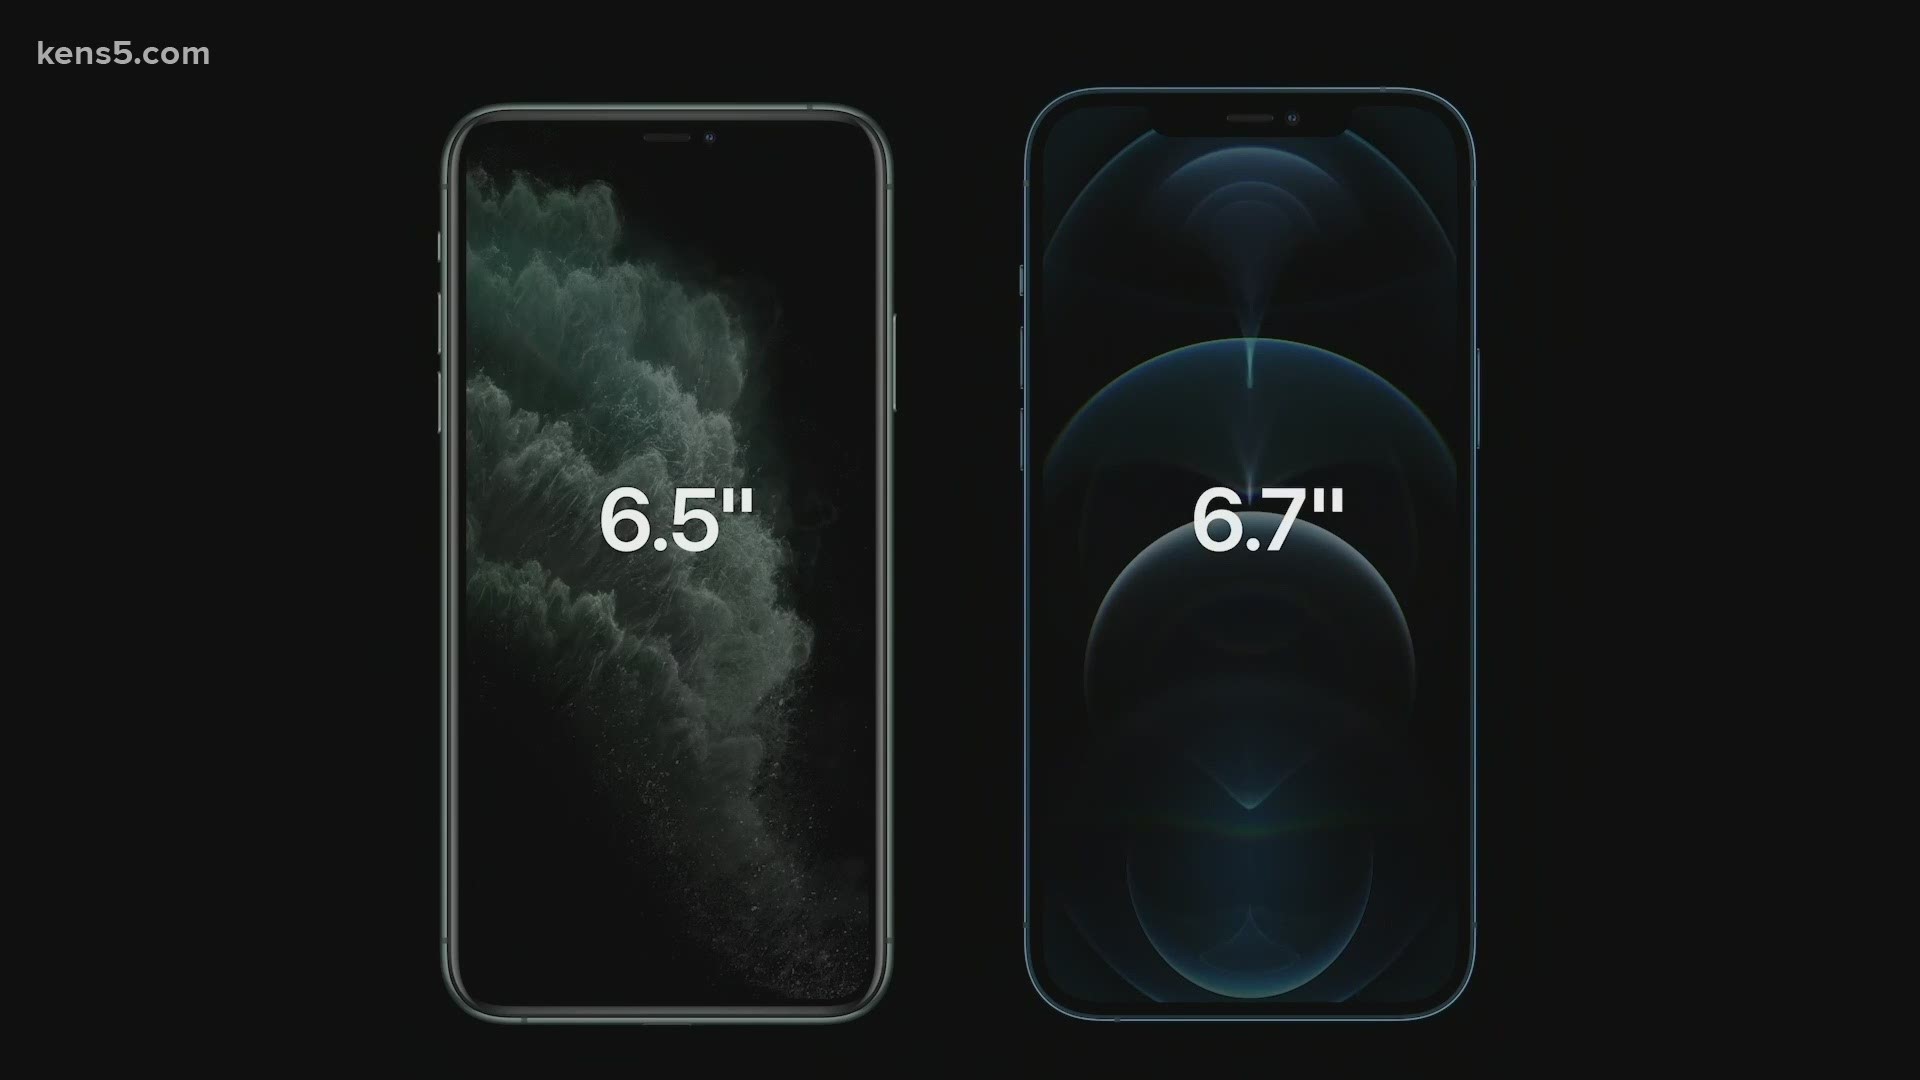 Thinner, faster, and more advanced. Today, Apple revealed the iPhone 12 lineup which features four new phones.